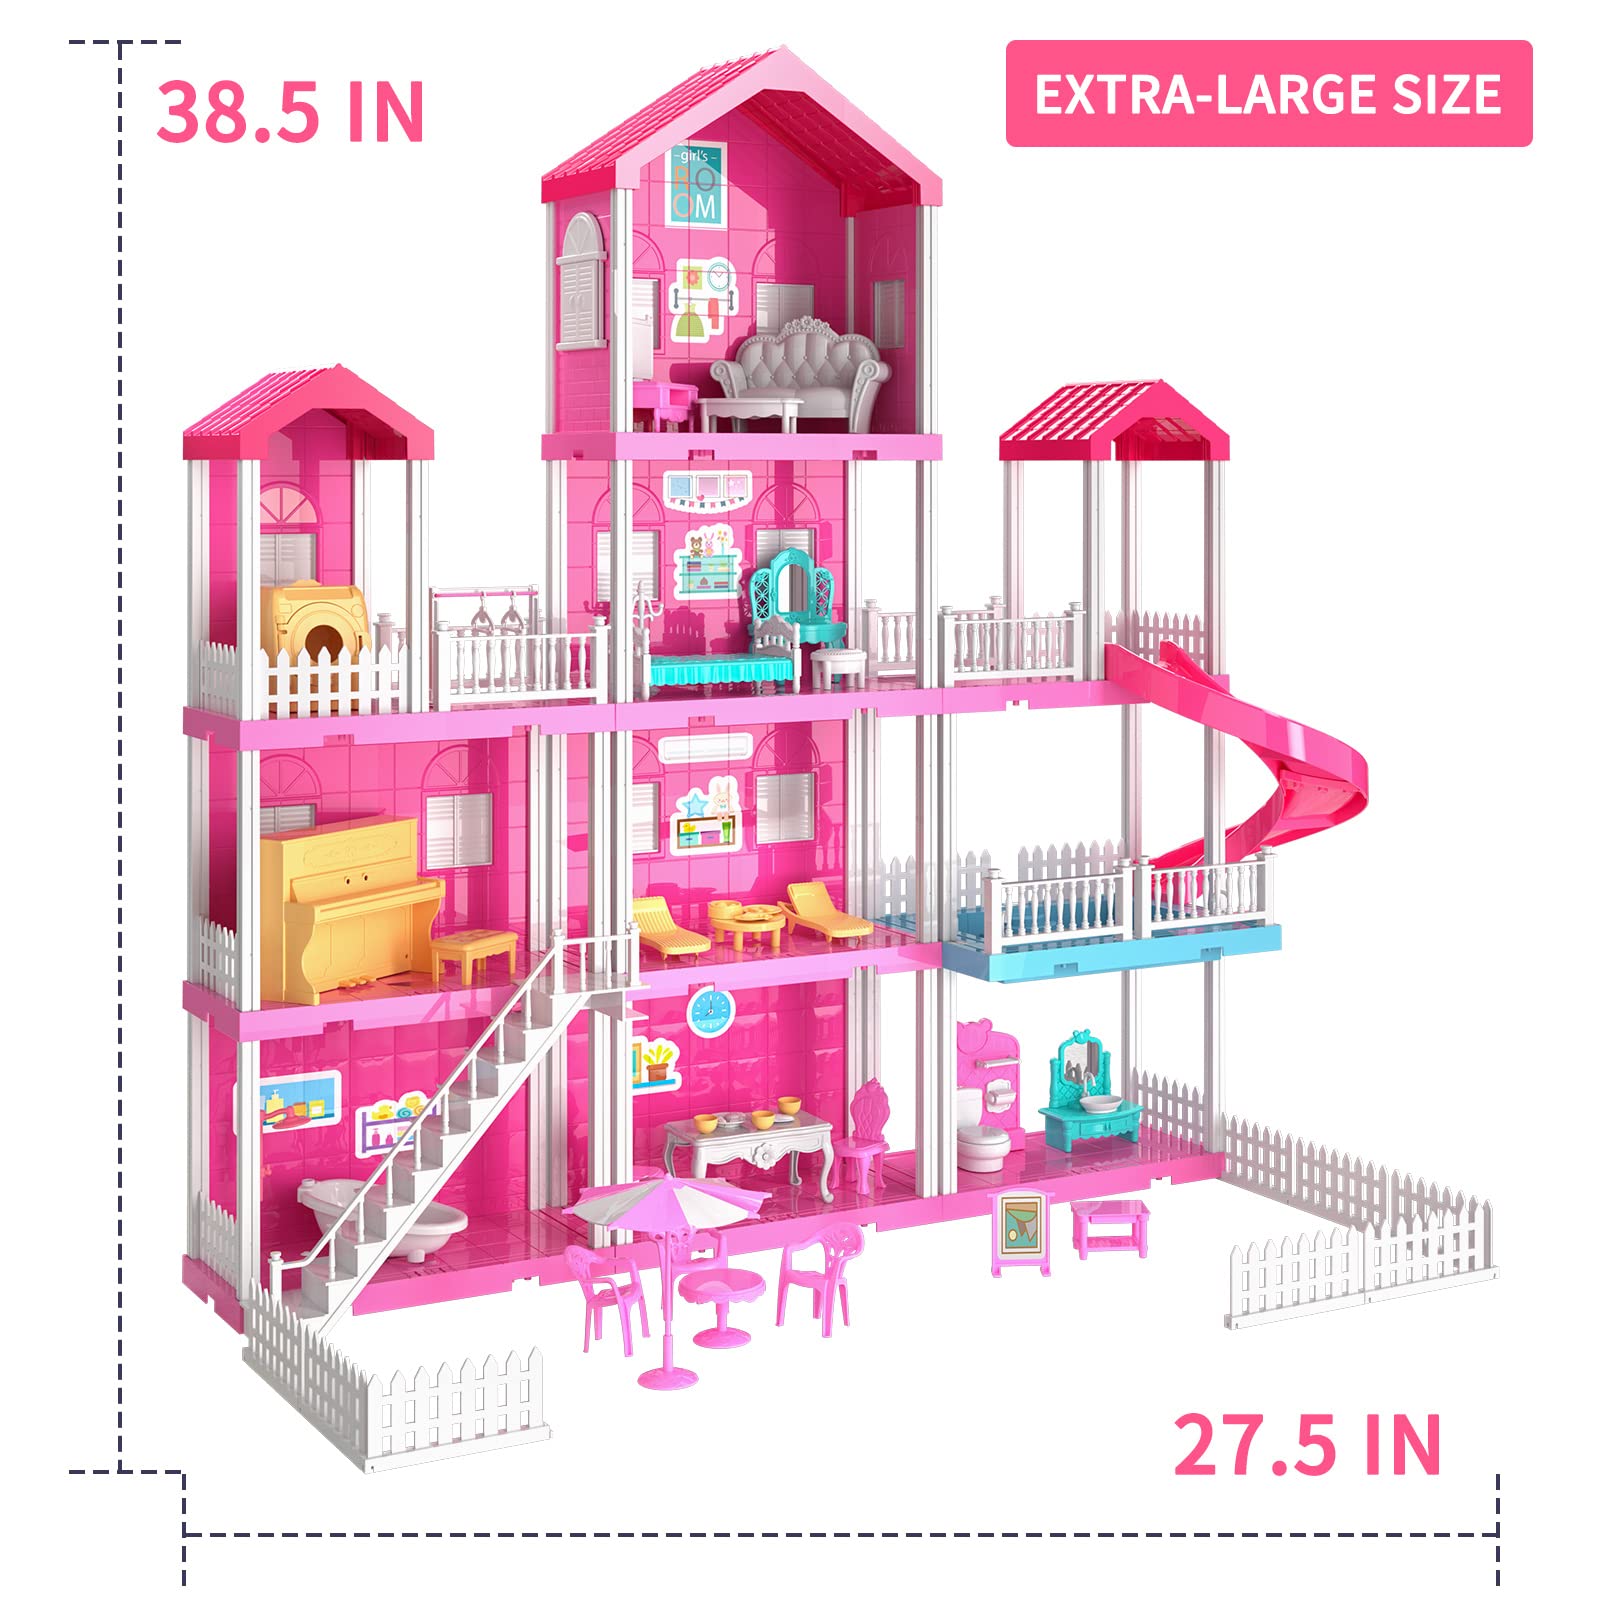 TEMI Dream House Doll House with 2 Doll Toy Figures, 4-Story 10 Rooms Dollhouse with Accessories and Furniture, Toddler Playhouse Gift for Kids Ages 3 Toys for 3 4 5 6 Year Old Girls